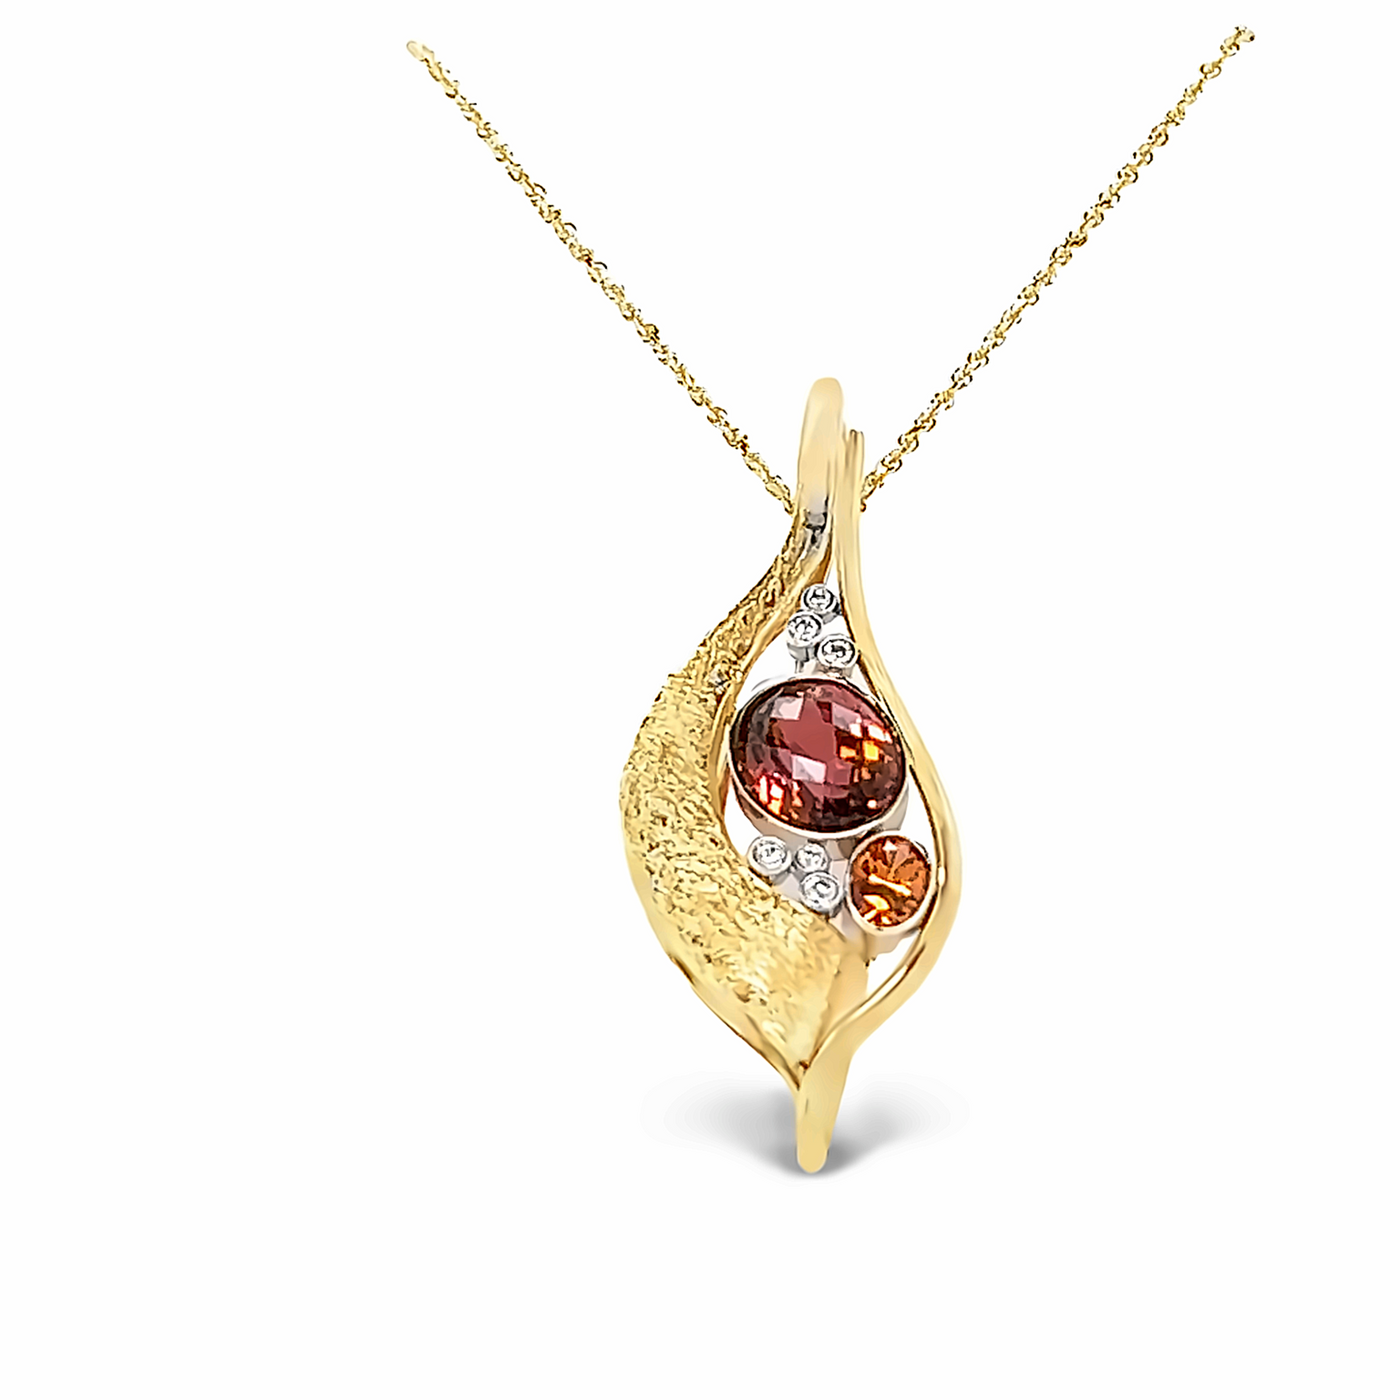 14k Yellow Gold Oval Bi-Color Tourmaline and Garnet Pendant by Paul Richter (6.14ct.)